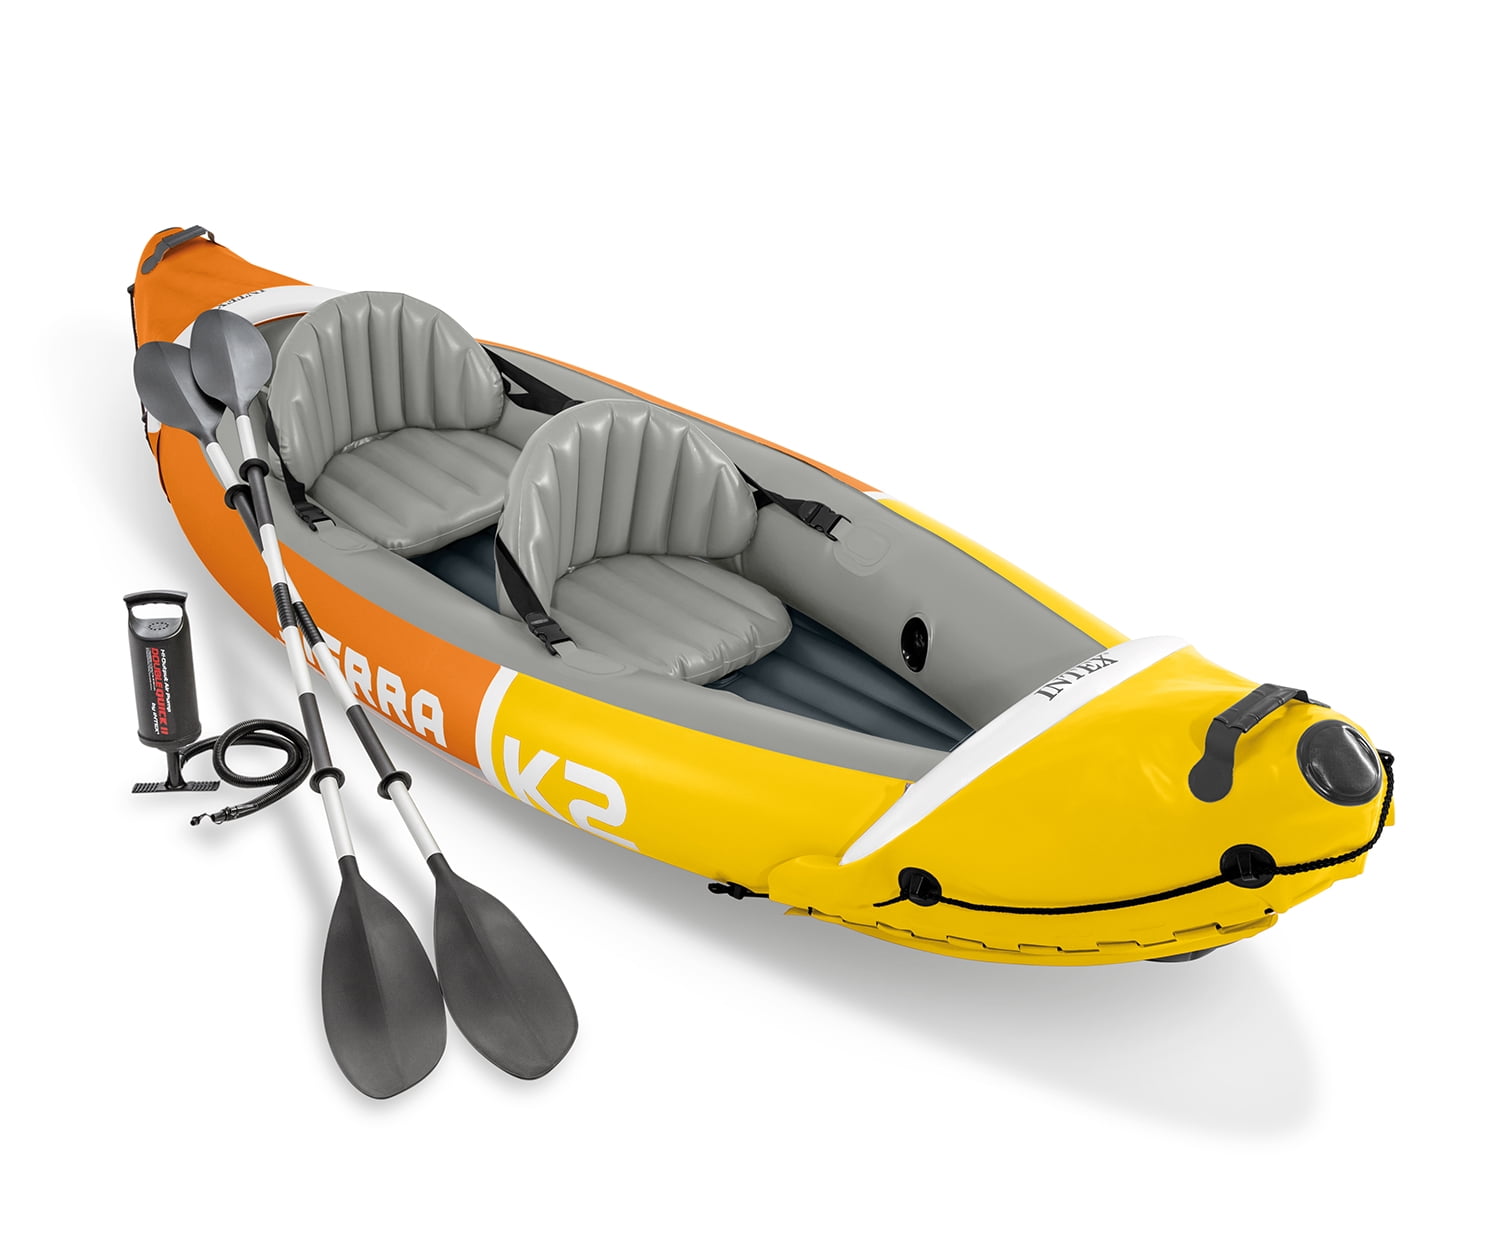 Excursion Pro 151 x 37 x 18 K2 Inflatable Kayak W/ Aluminum Oars, Pump,  Fishing Rod Holders, Carry Bag 